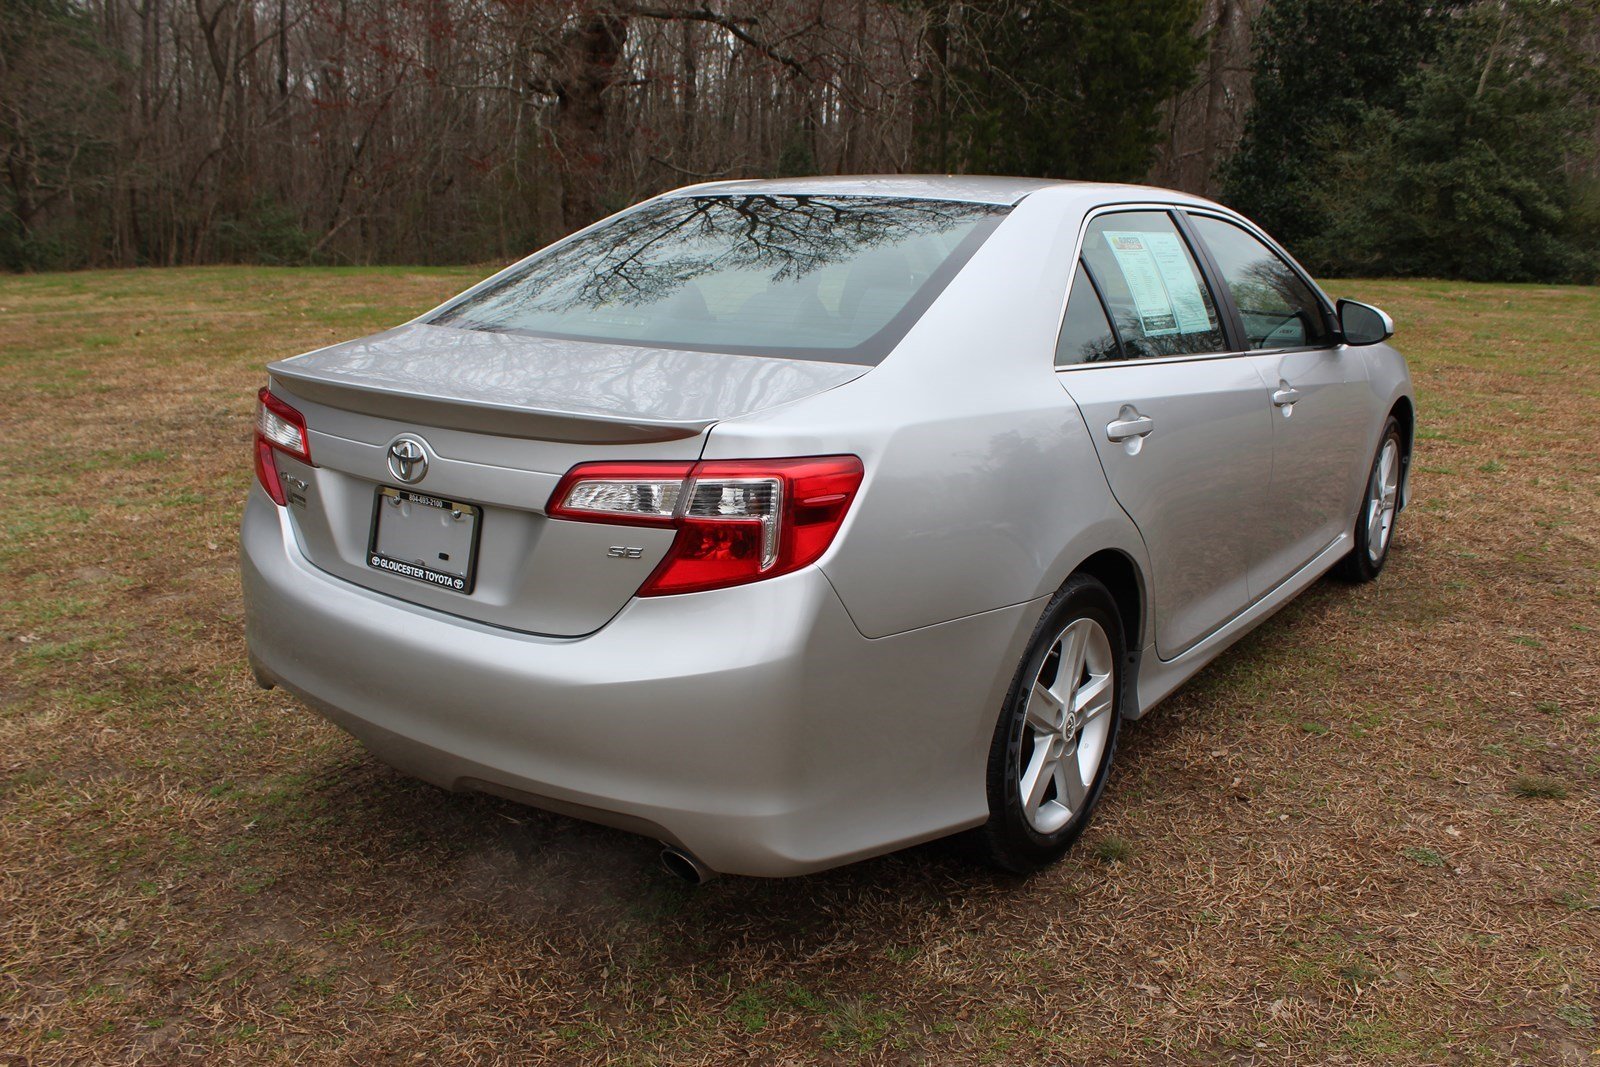 Pre-Owned 2012 Toyota Camry SE 4dr Car in Gloucester #P2730 ...